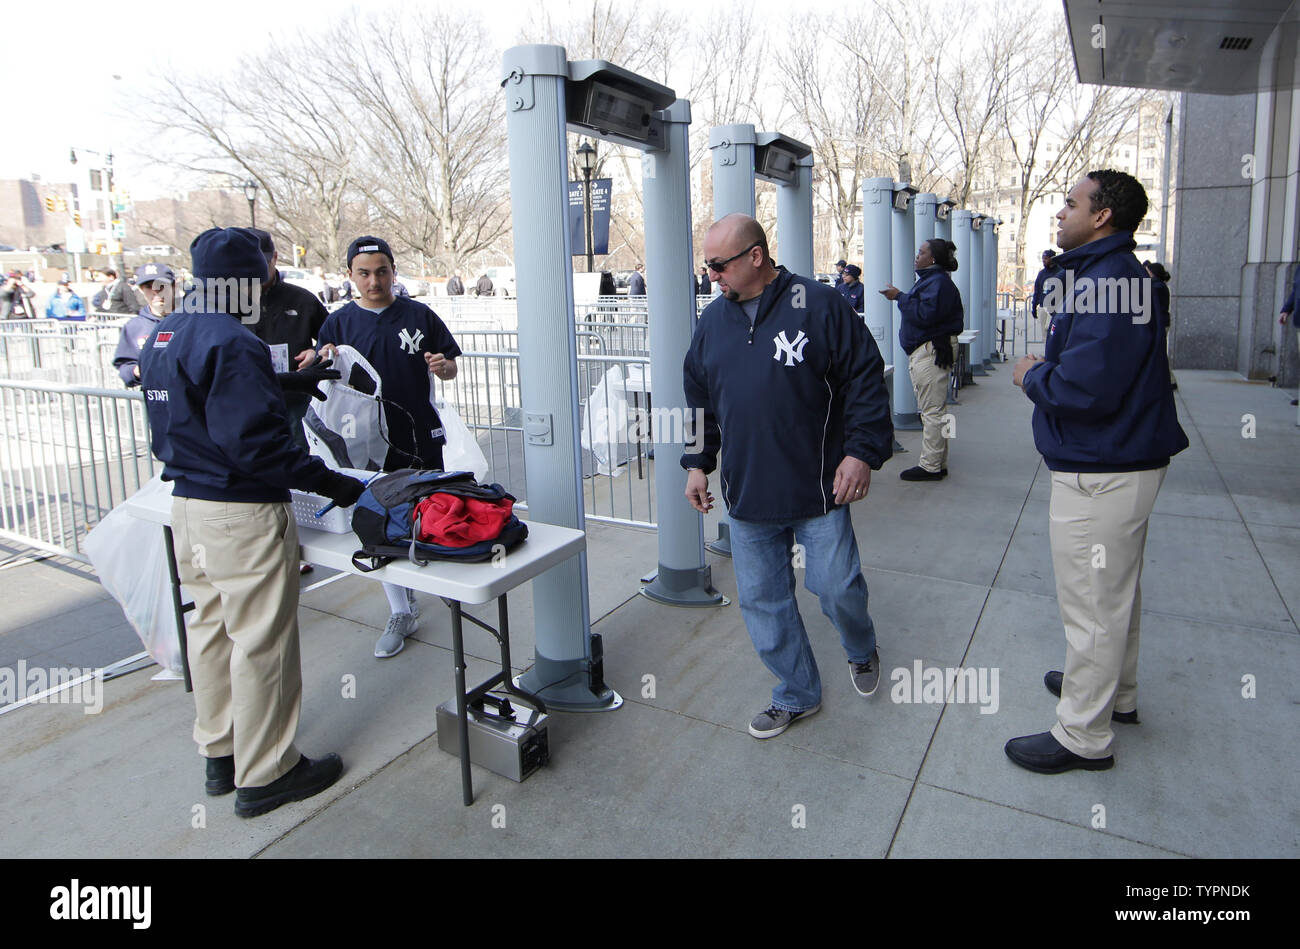 Fans have there bags checked before walking through metal detecters upon  entering the stadium at the opening series of the 2015 MLB Season where the  New York Yankees will play the Toronto